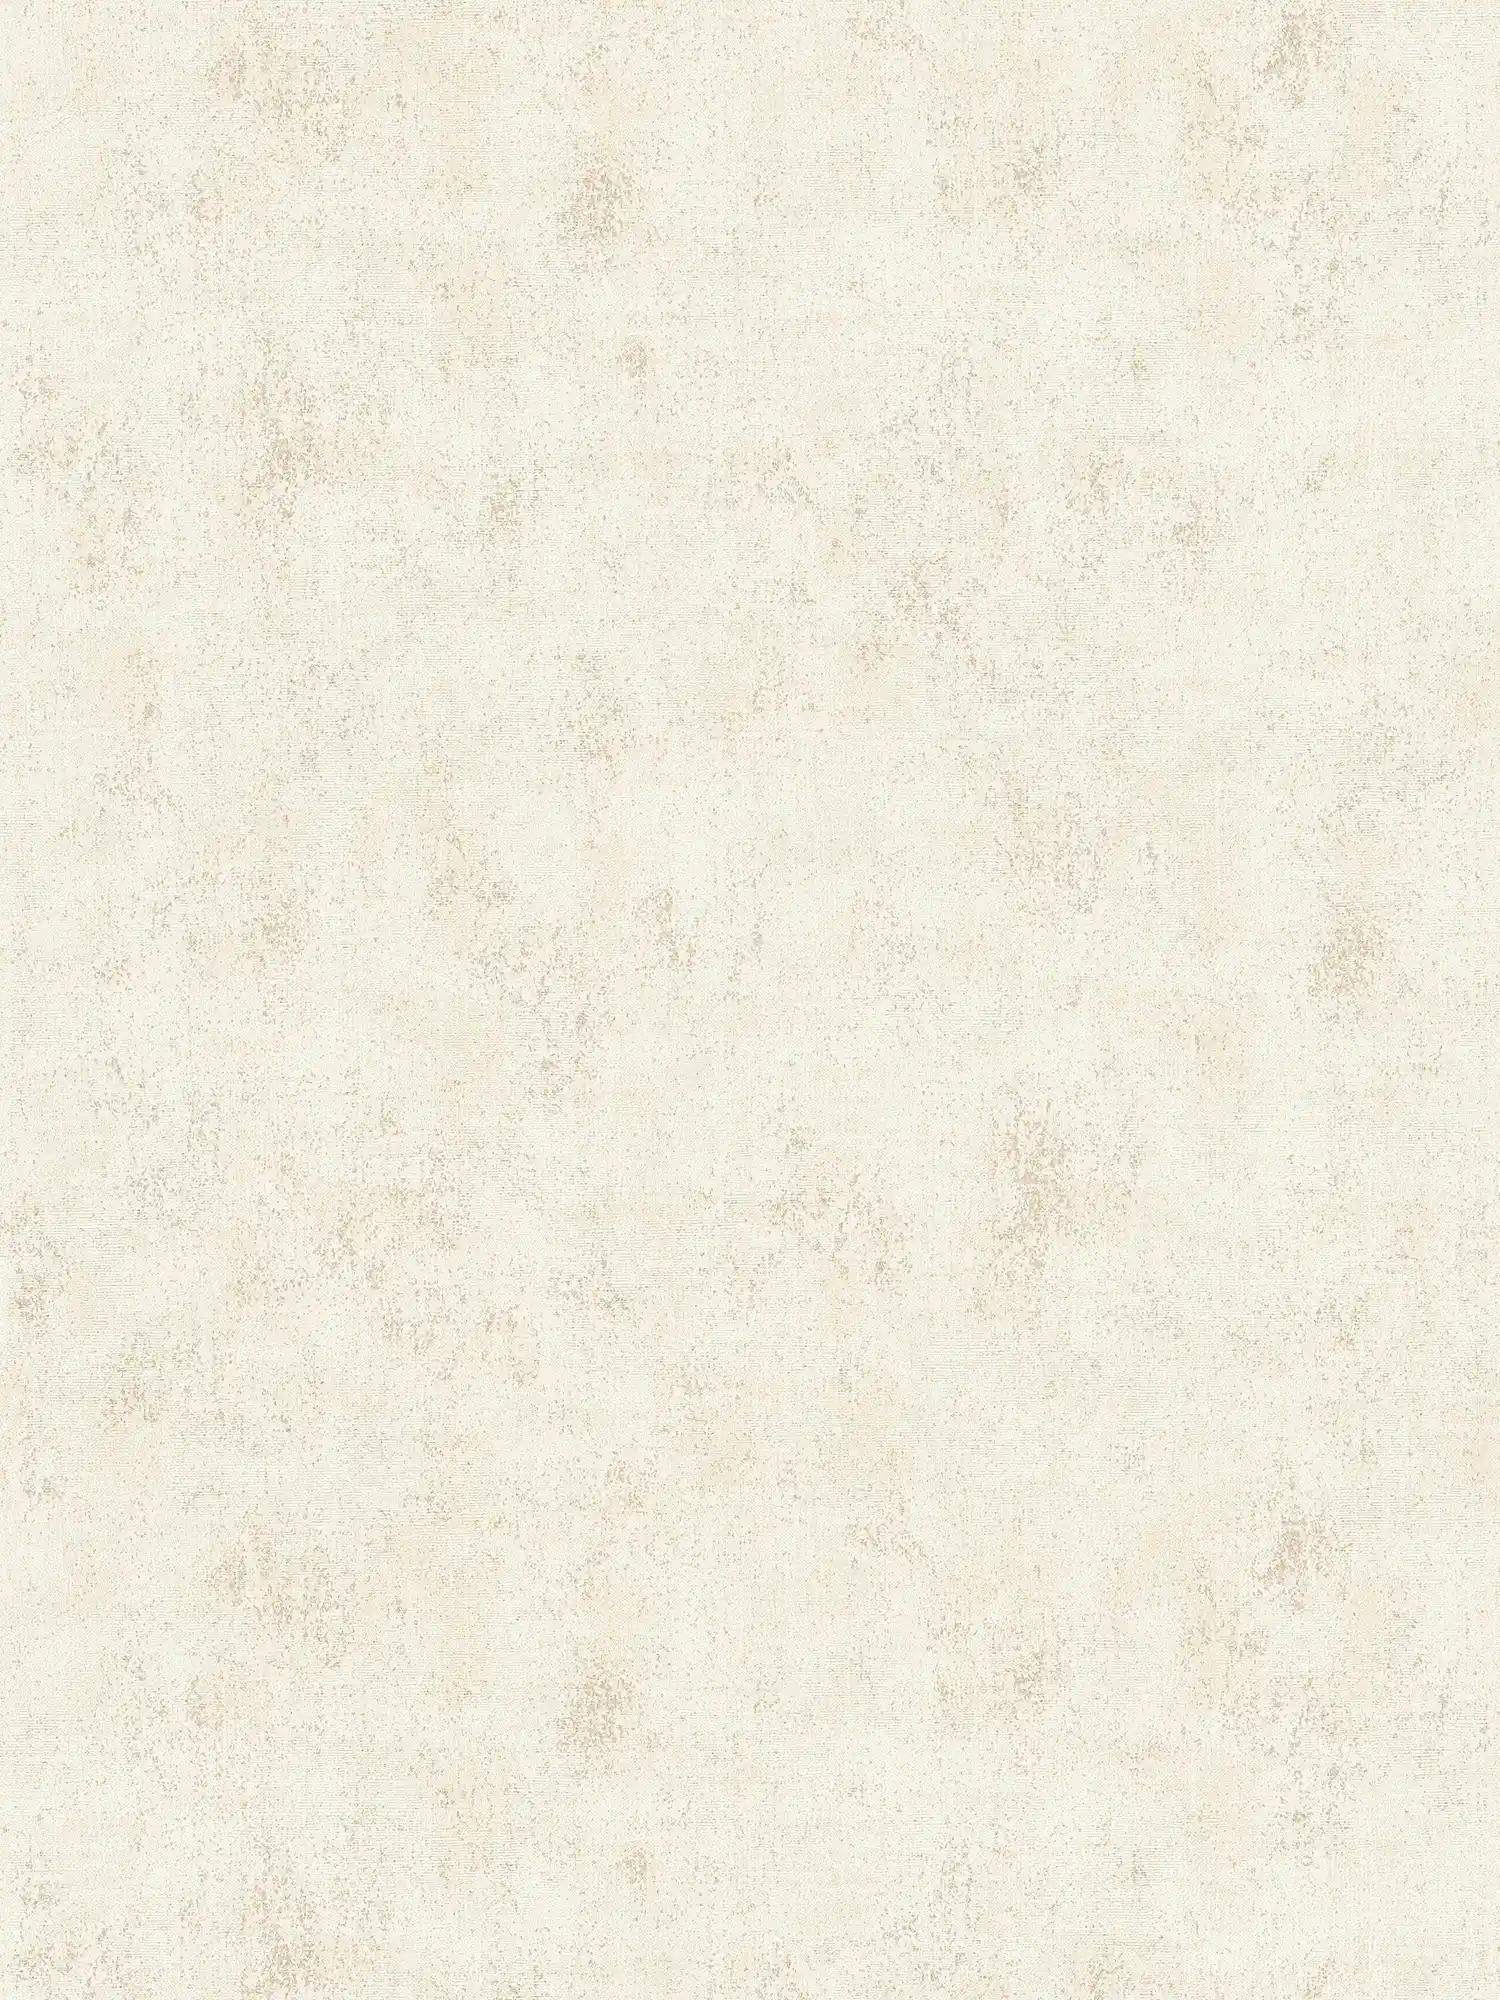 Wallpaper with discreet structure design - beige
